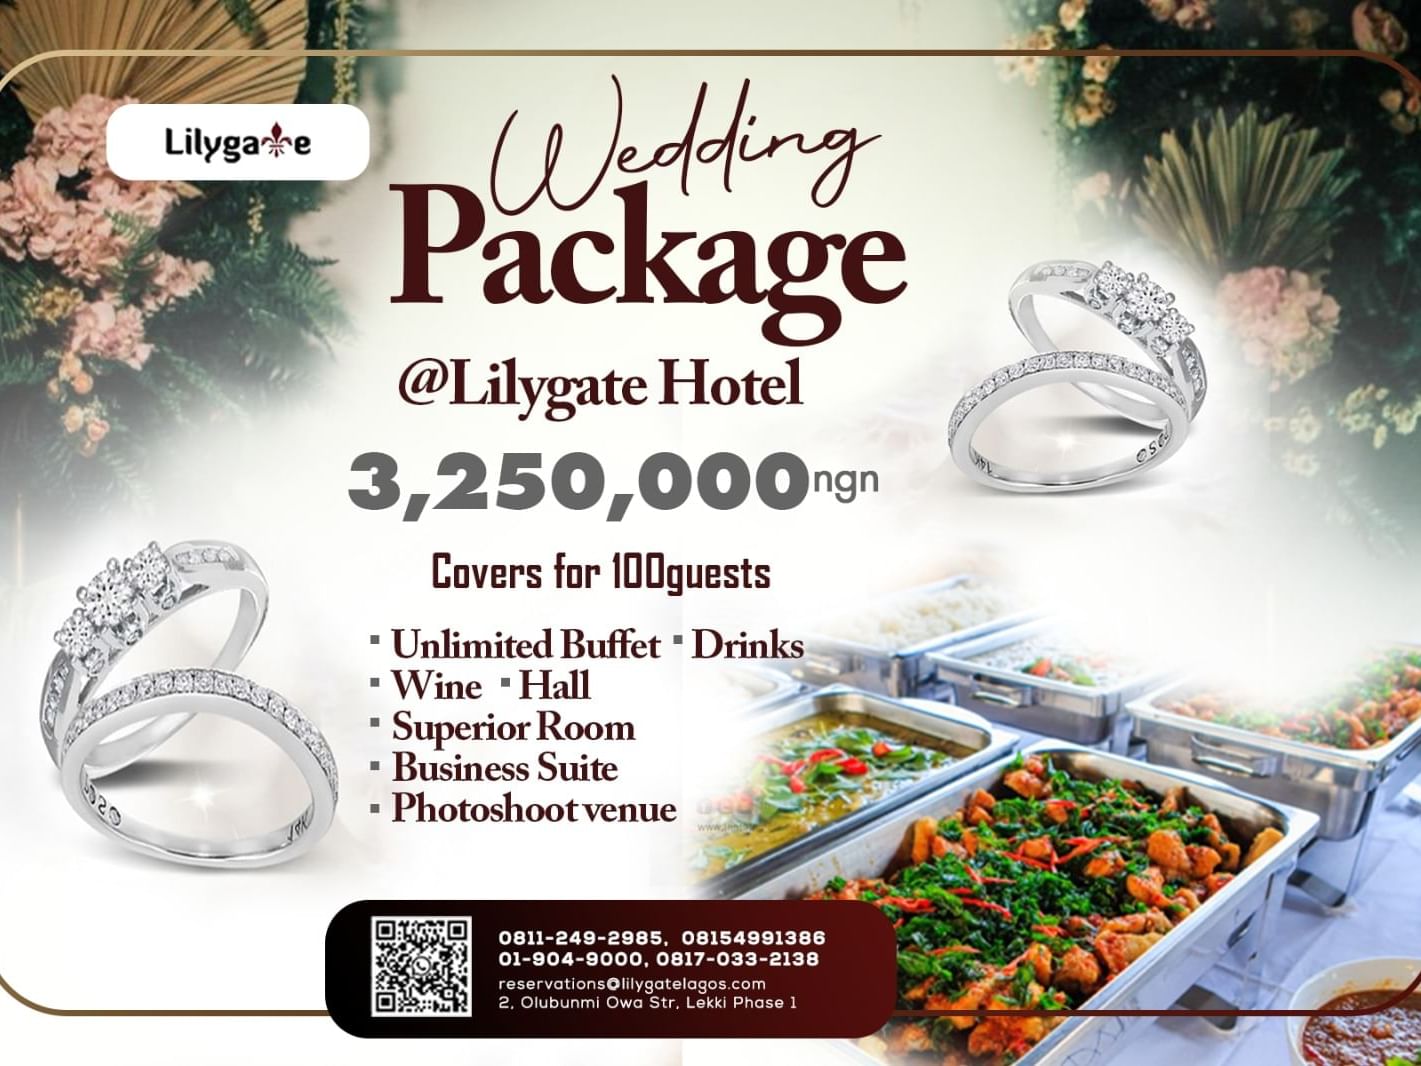 For 100 guests, unlimited buffet, wine and hall, a superior room, business suite and a photoshoot venue Price: N3,250,000